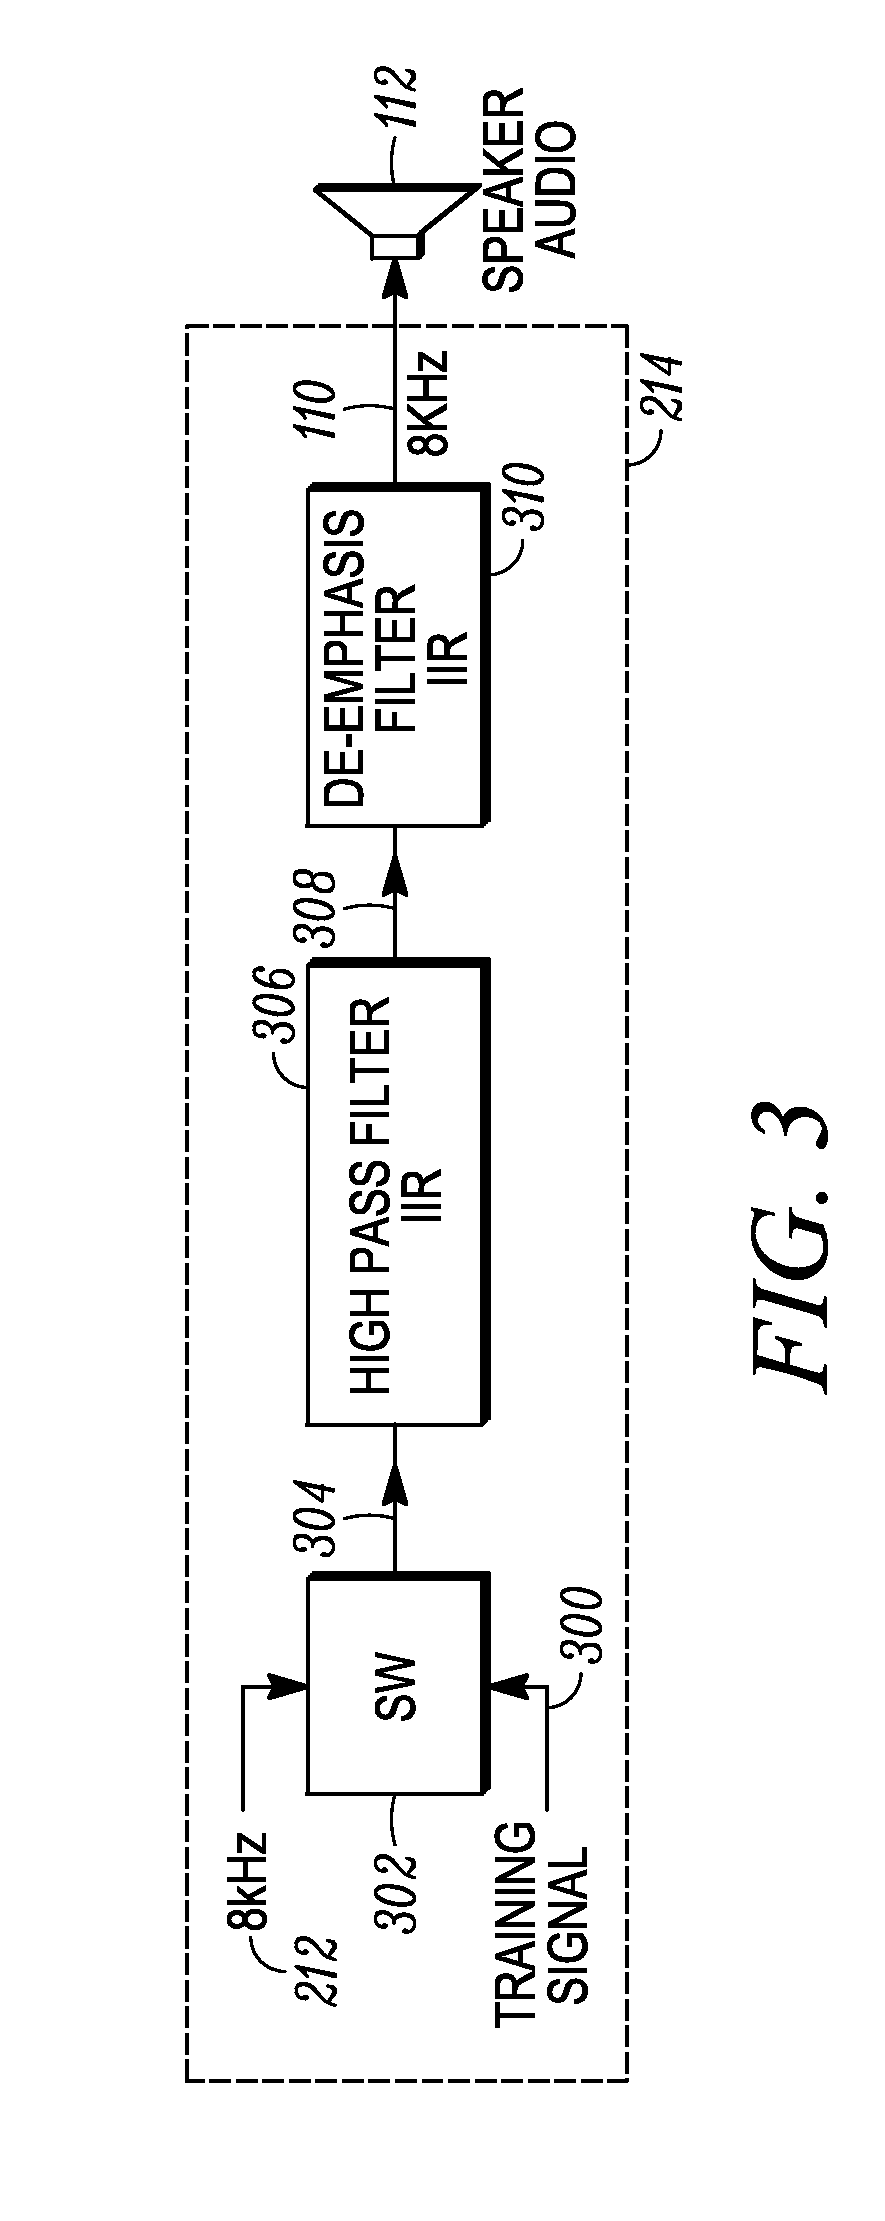 Audio hole suppression method and apparatus for a two-way radio